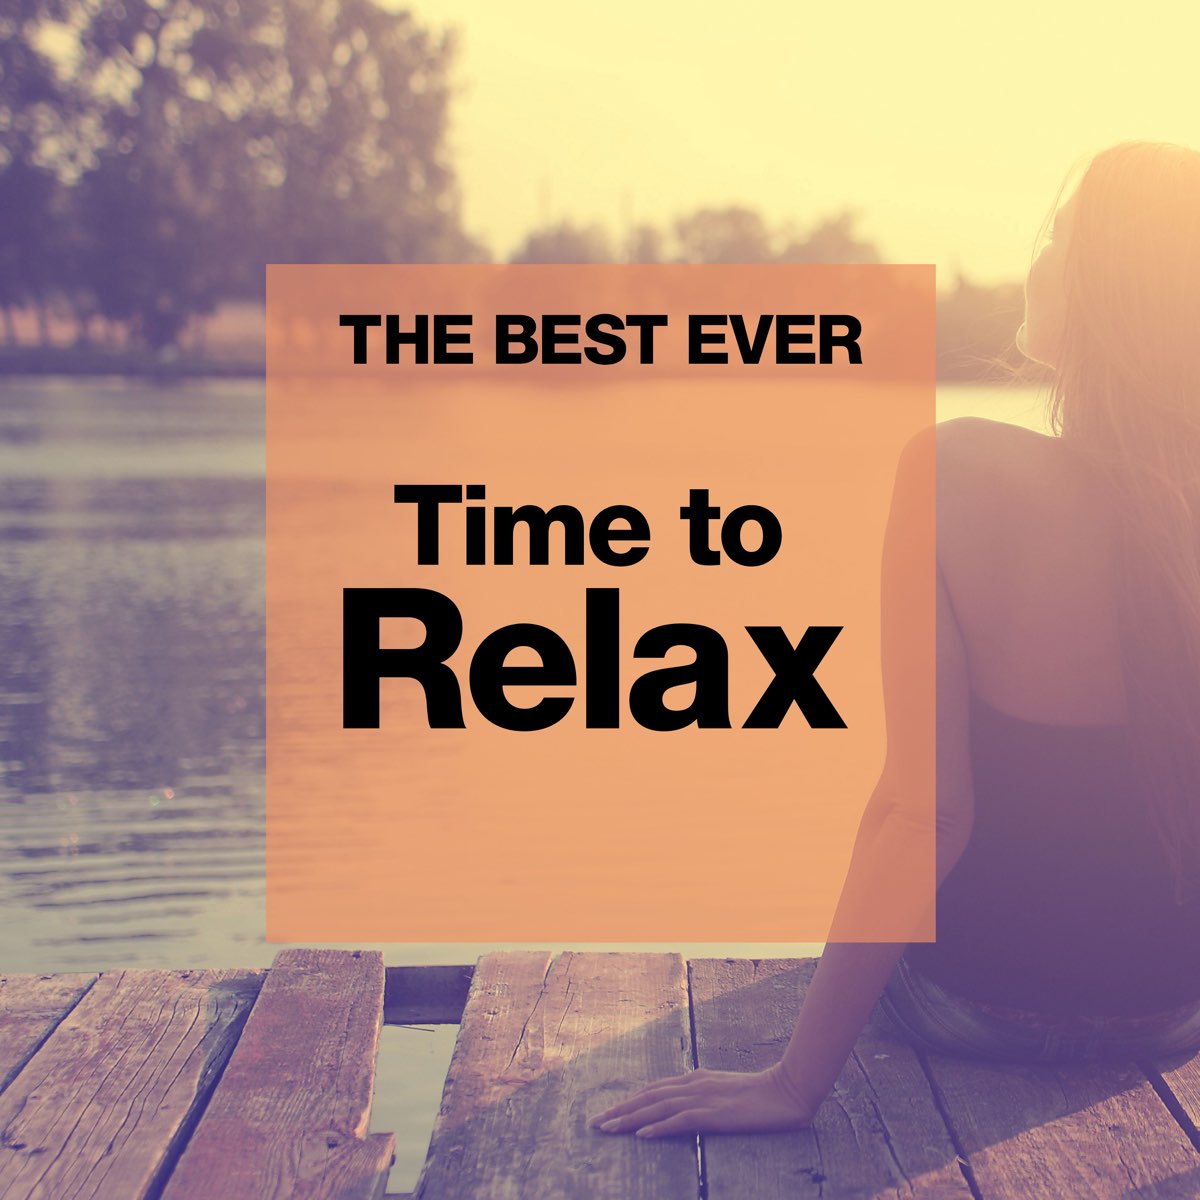 Best you ever have. Best ever. Time to Relax. Time to Relax перевод. Best time ever.